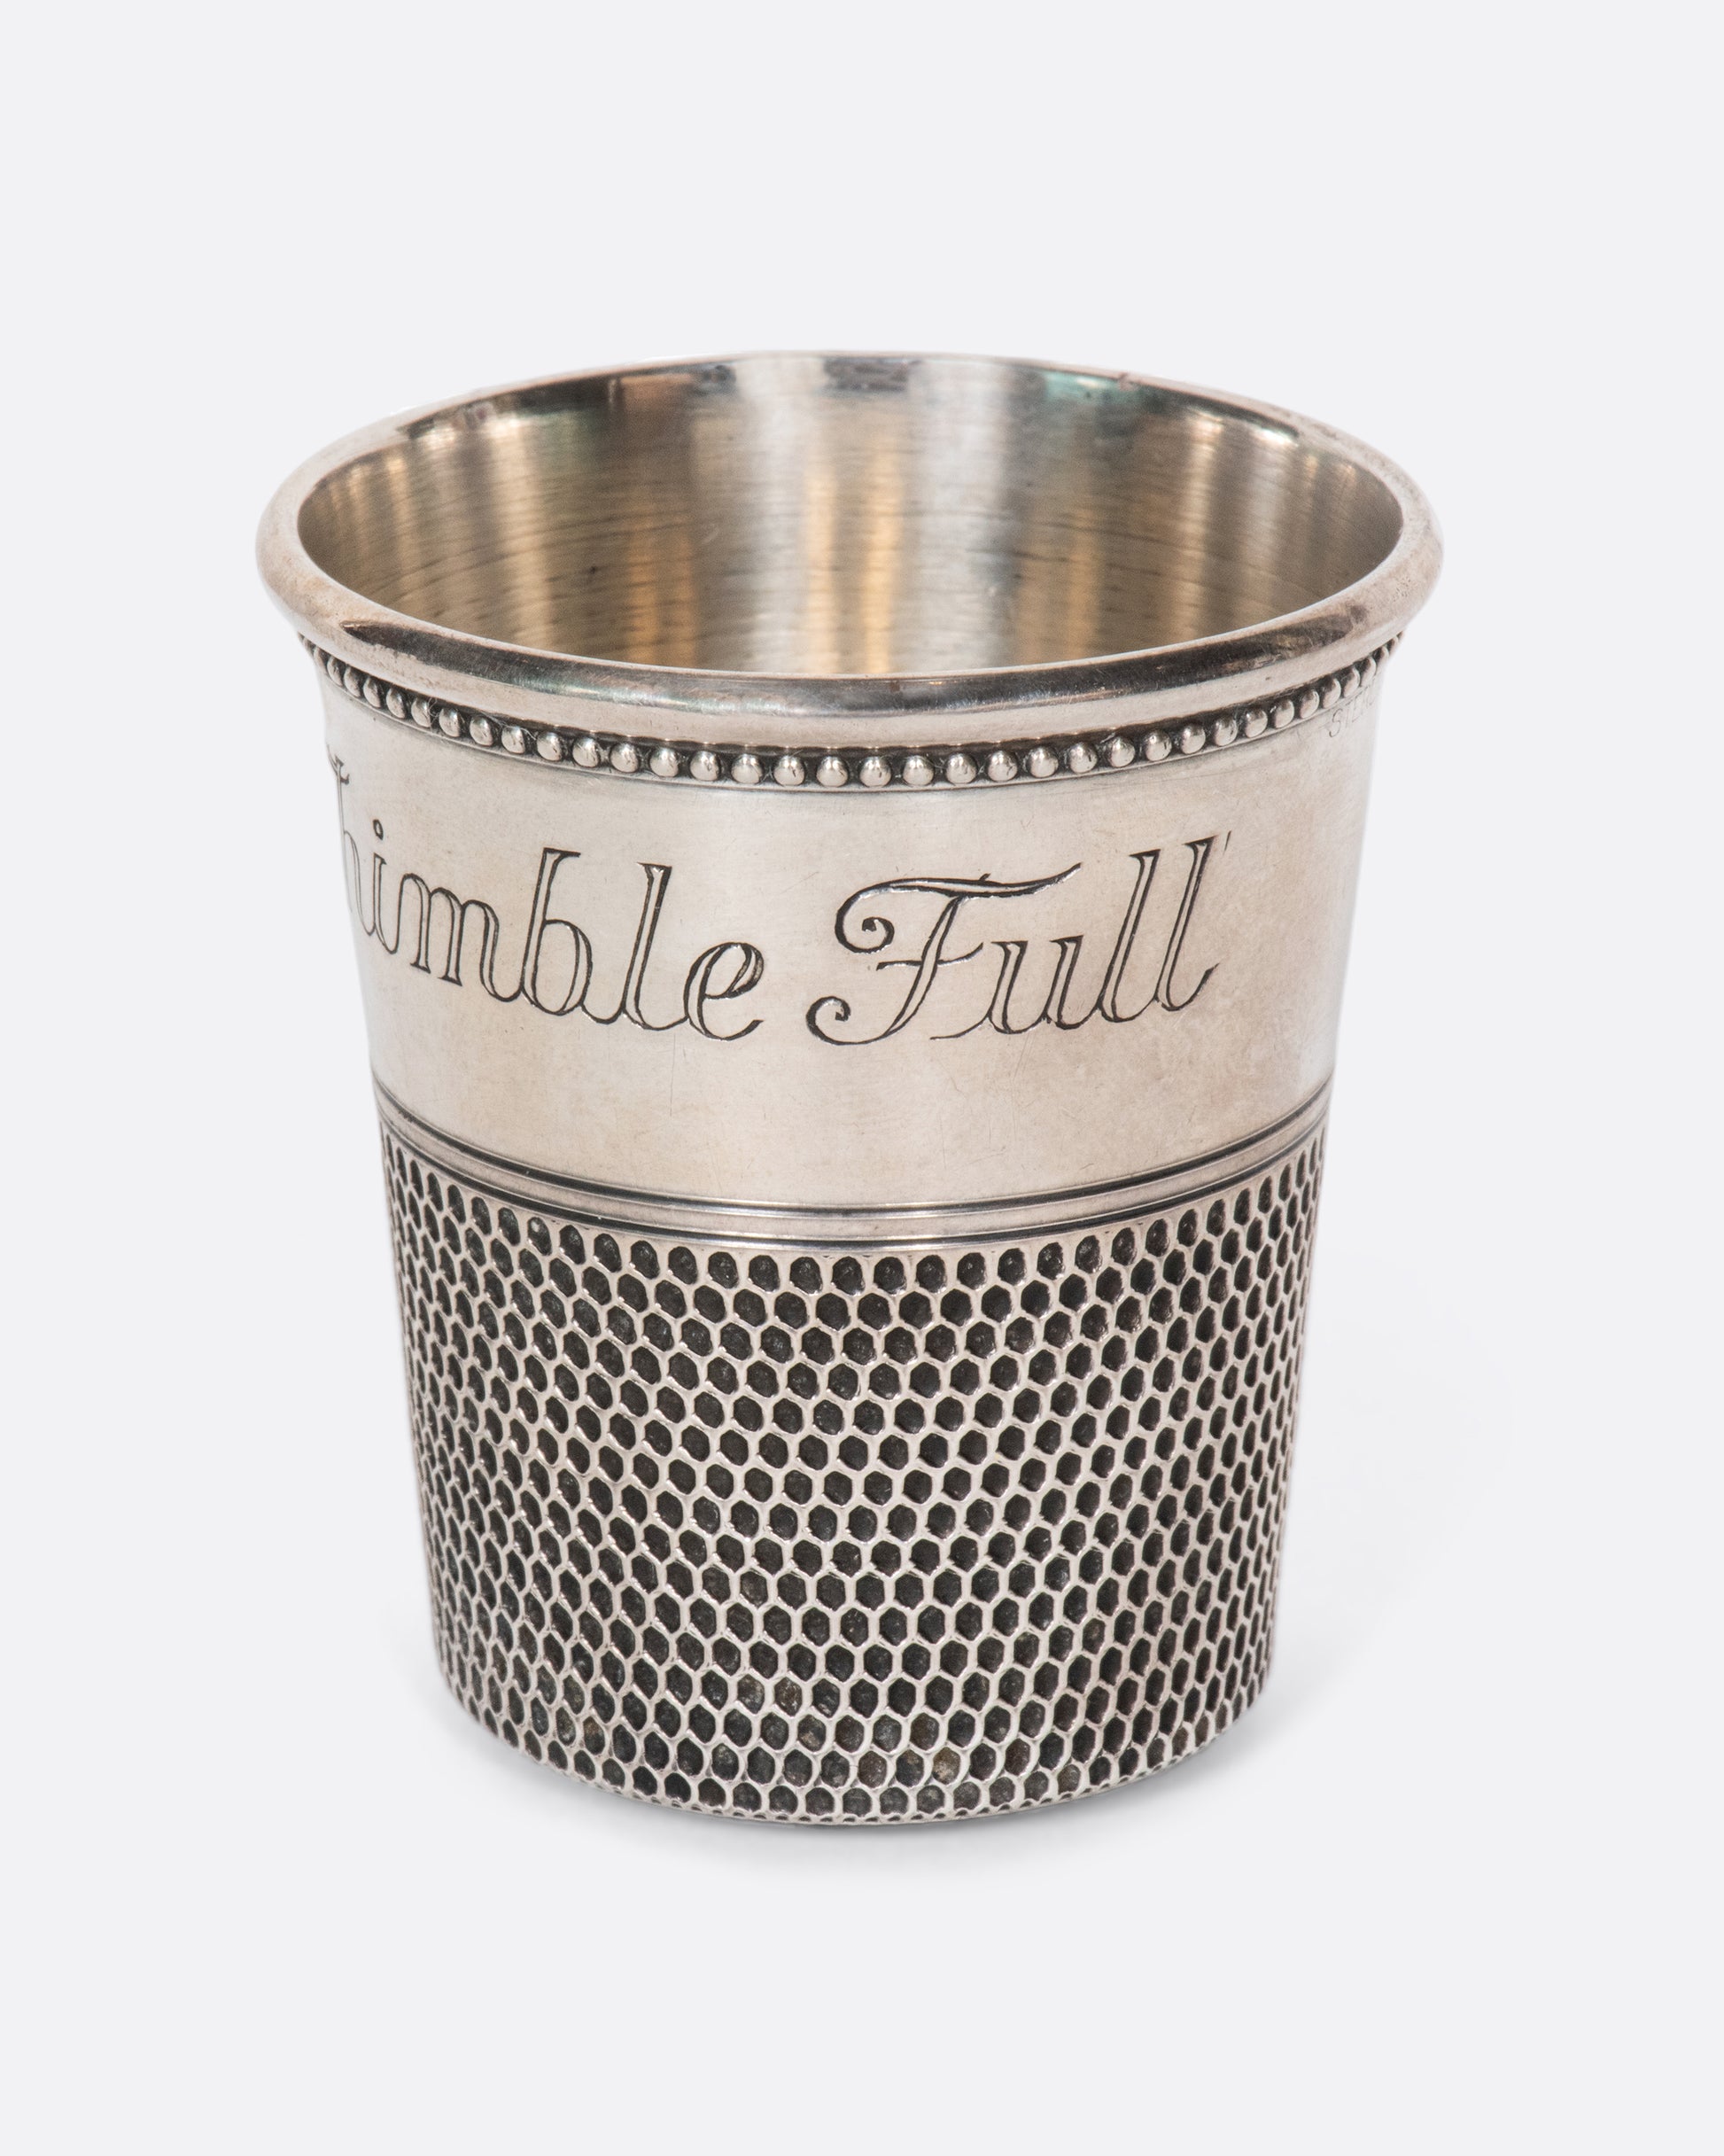 This rare sterling silver vintage shot glass is engraved with "Only a thimble full". A cheeky, yet elegant addition to any bar.